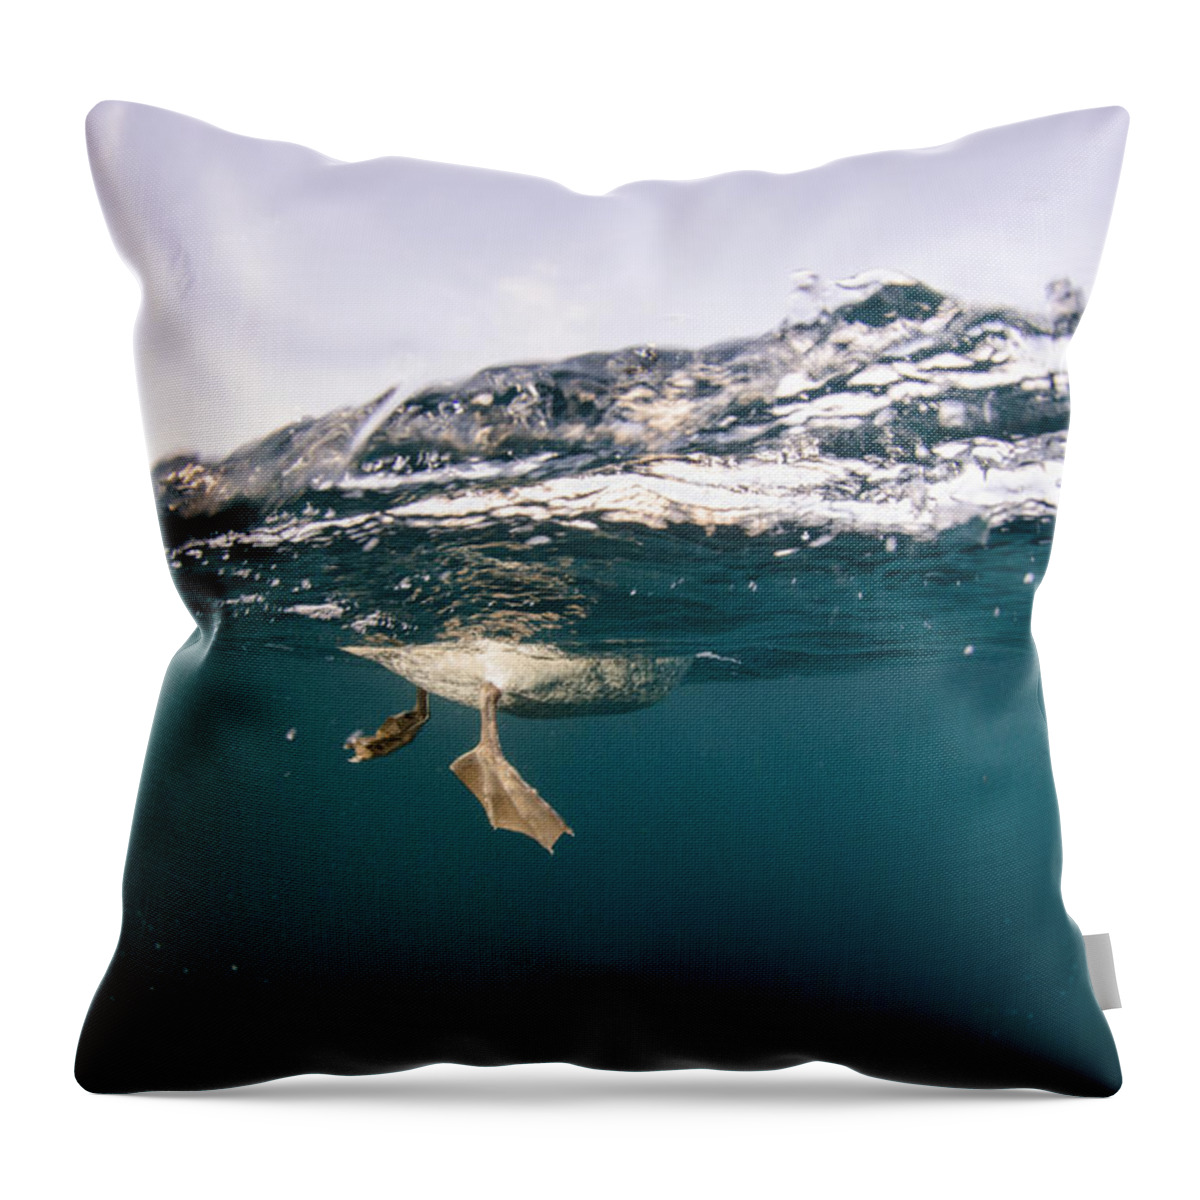 Feb0514 Throw Pillow featuring the photograph Cape Gannet Feet Underwater South Africa by Pete Oxford